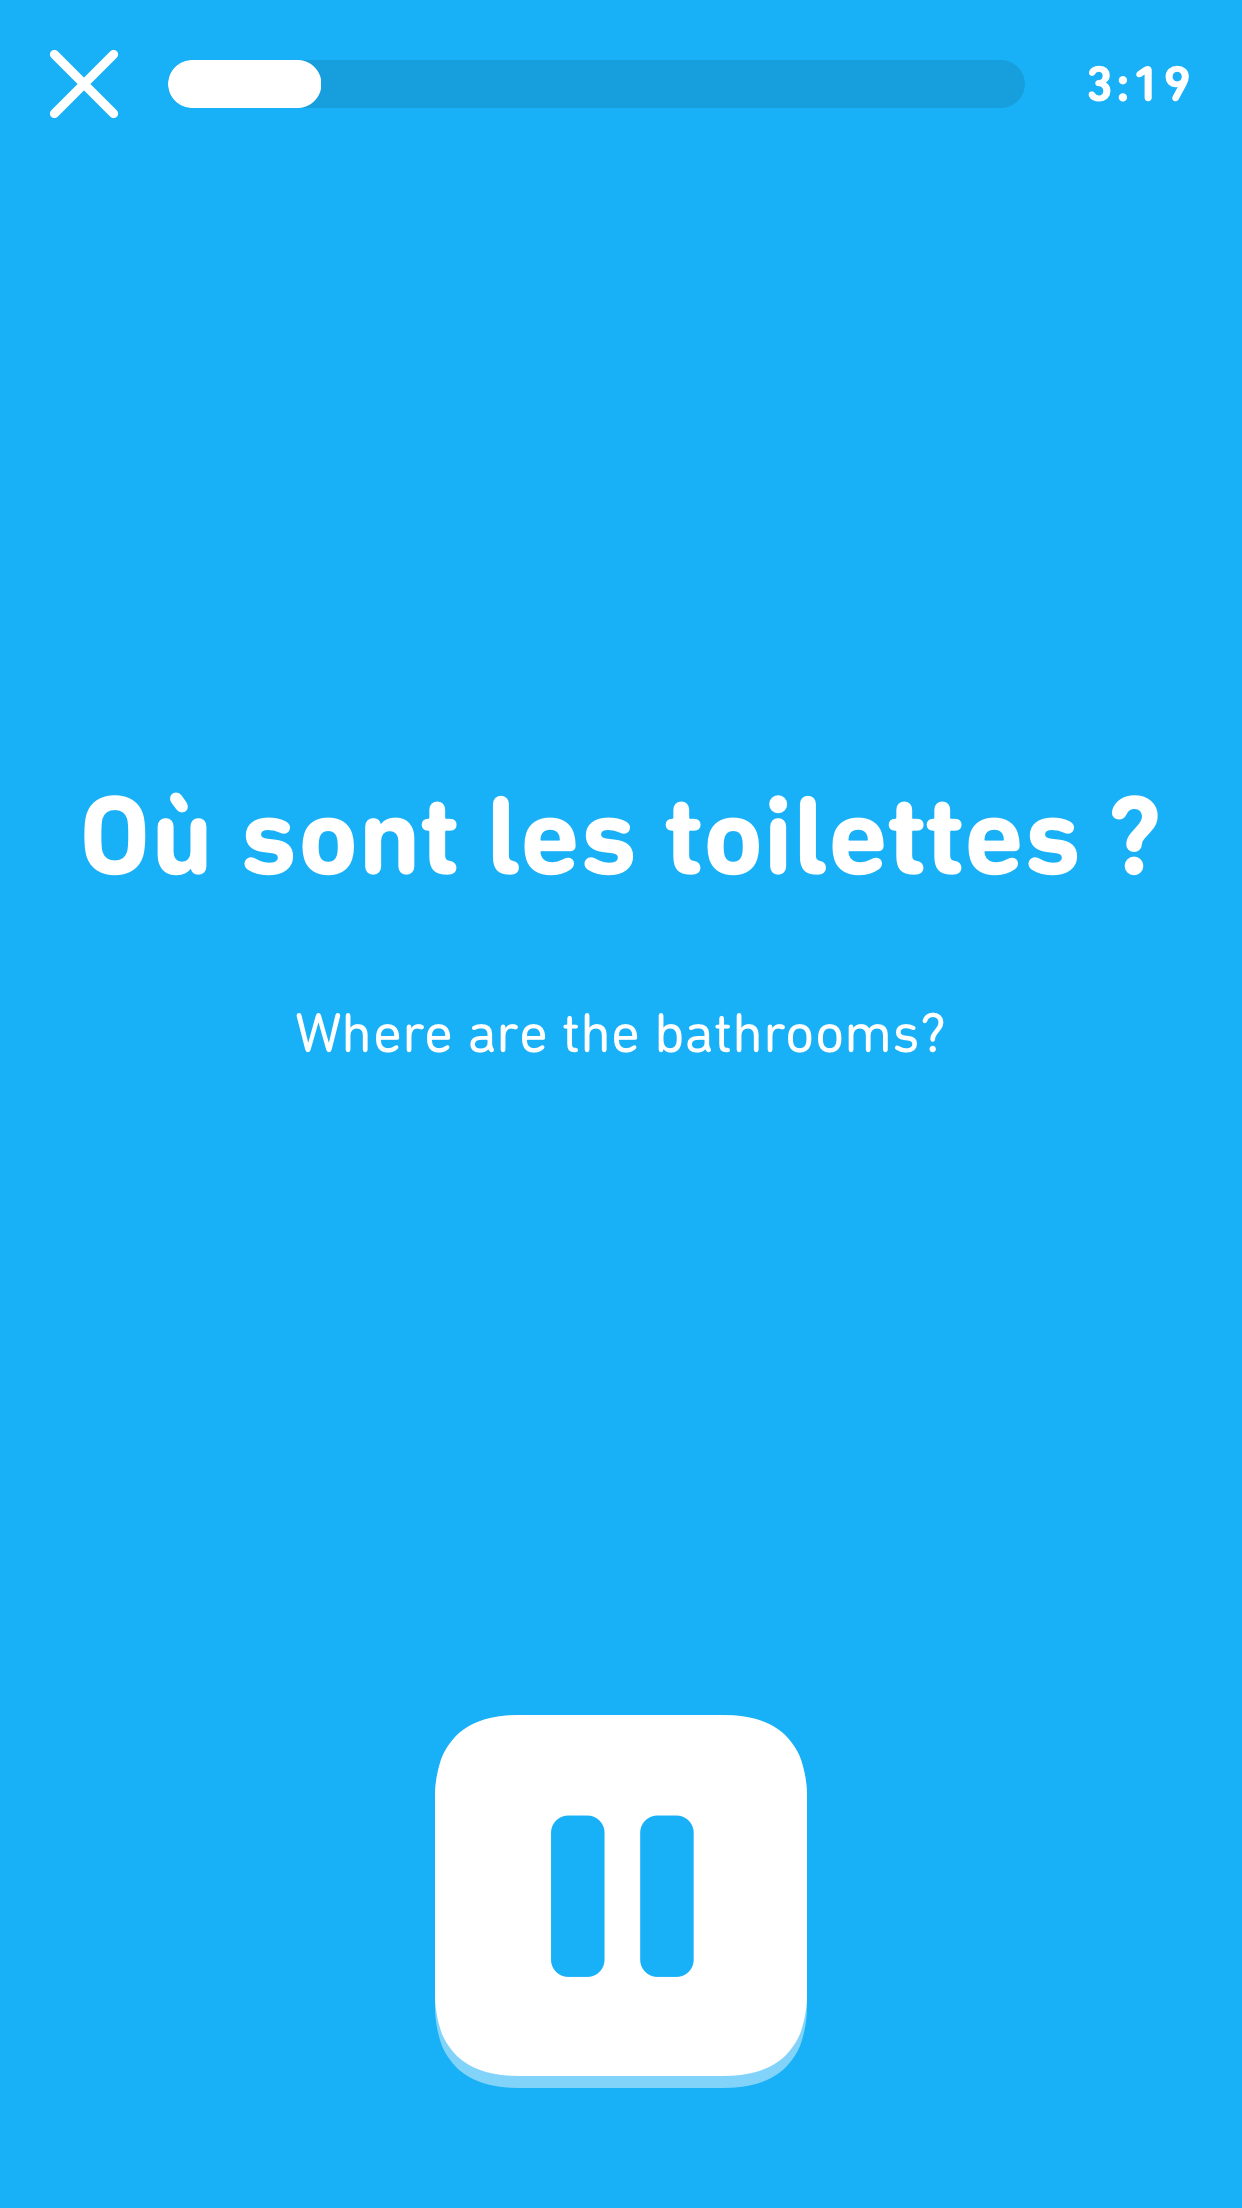 Screenshot of an audio lesson. The screen is all blue and in the center is a French phrase written in white. Under the French, in smaller font, is the English translation, "Where are the bathrooms?" At the bottom is a large pause button.